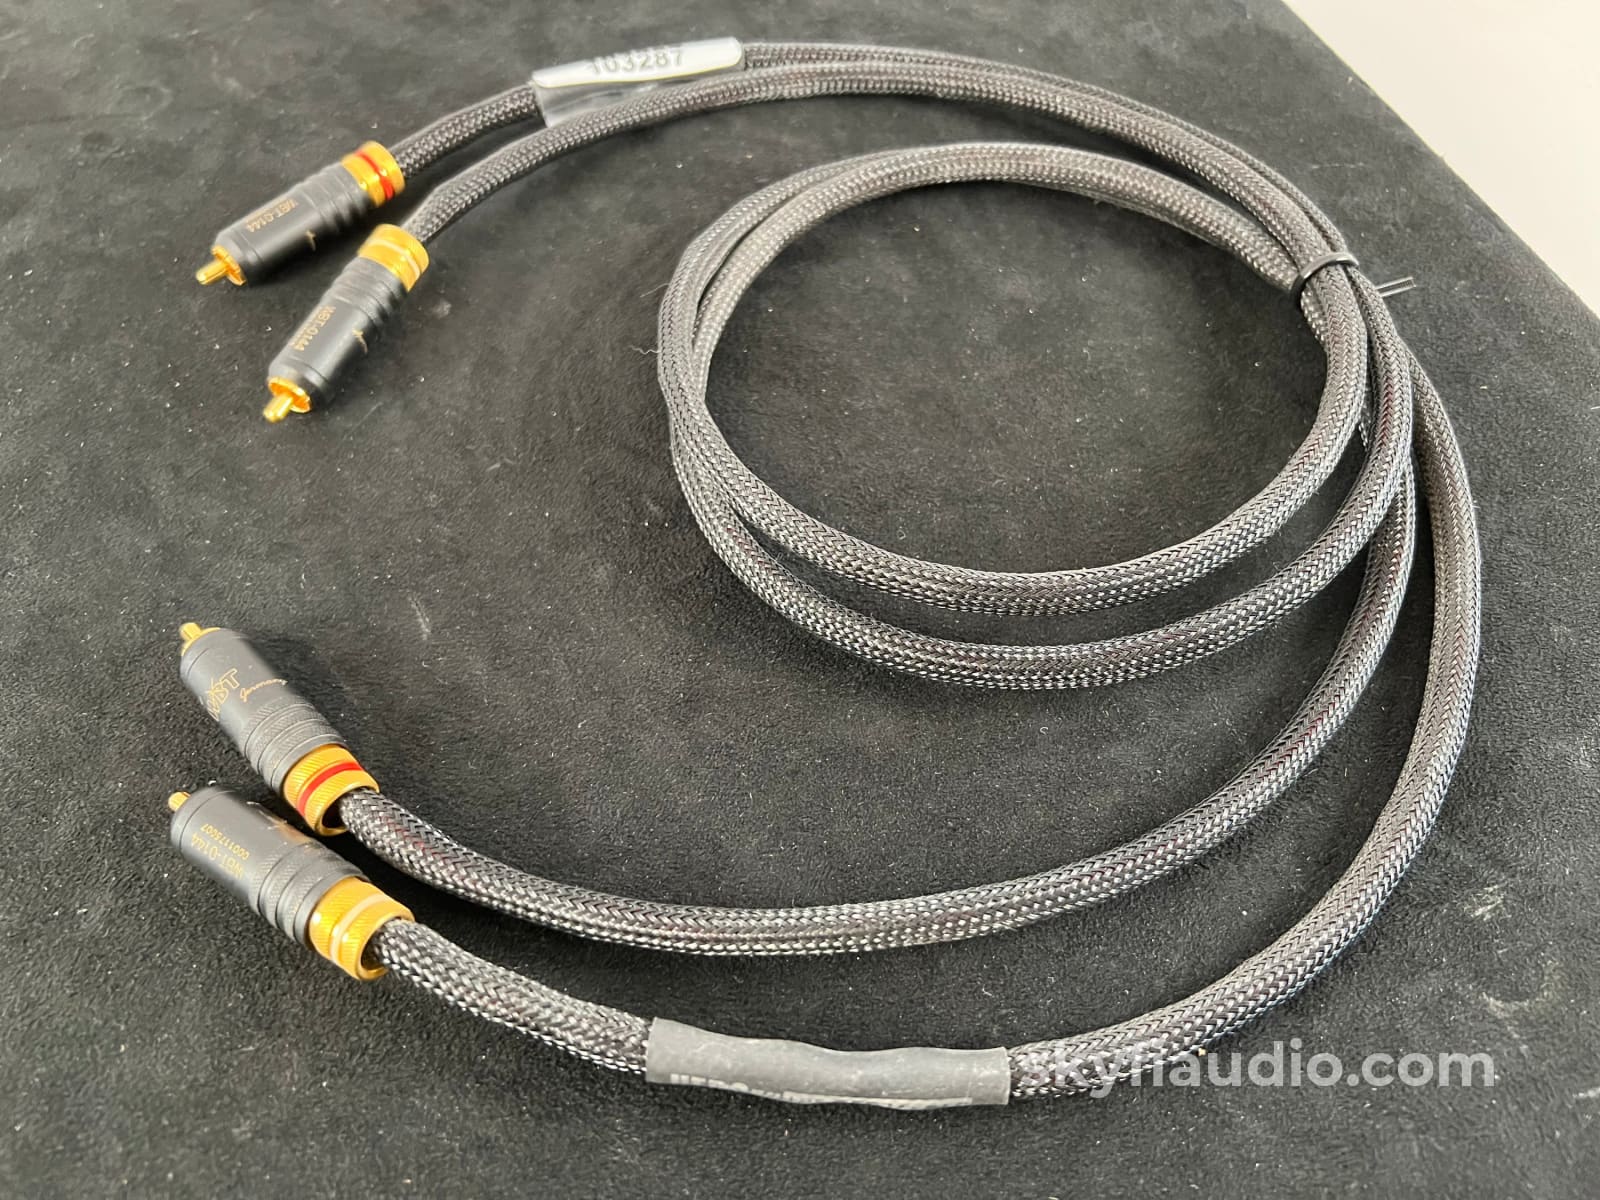 Kimber Kable Hero RCA Interconnects (Pair) With German-Made WBT Connec